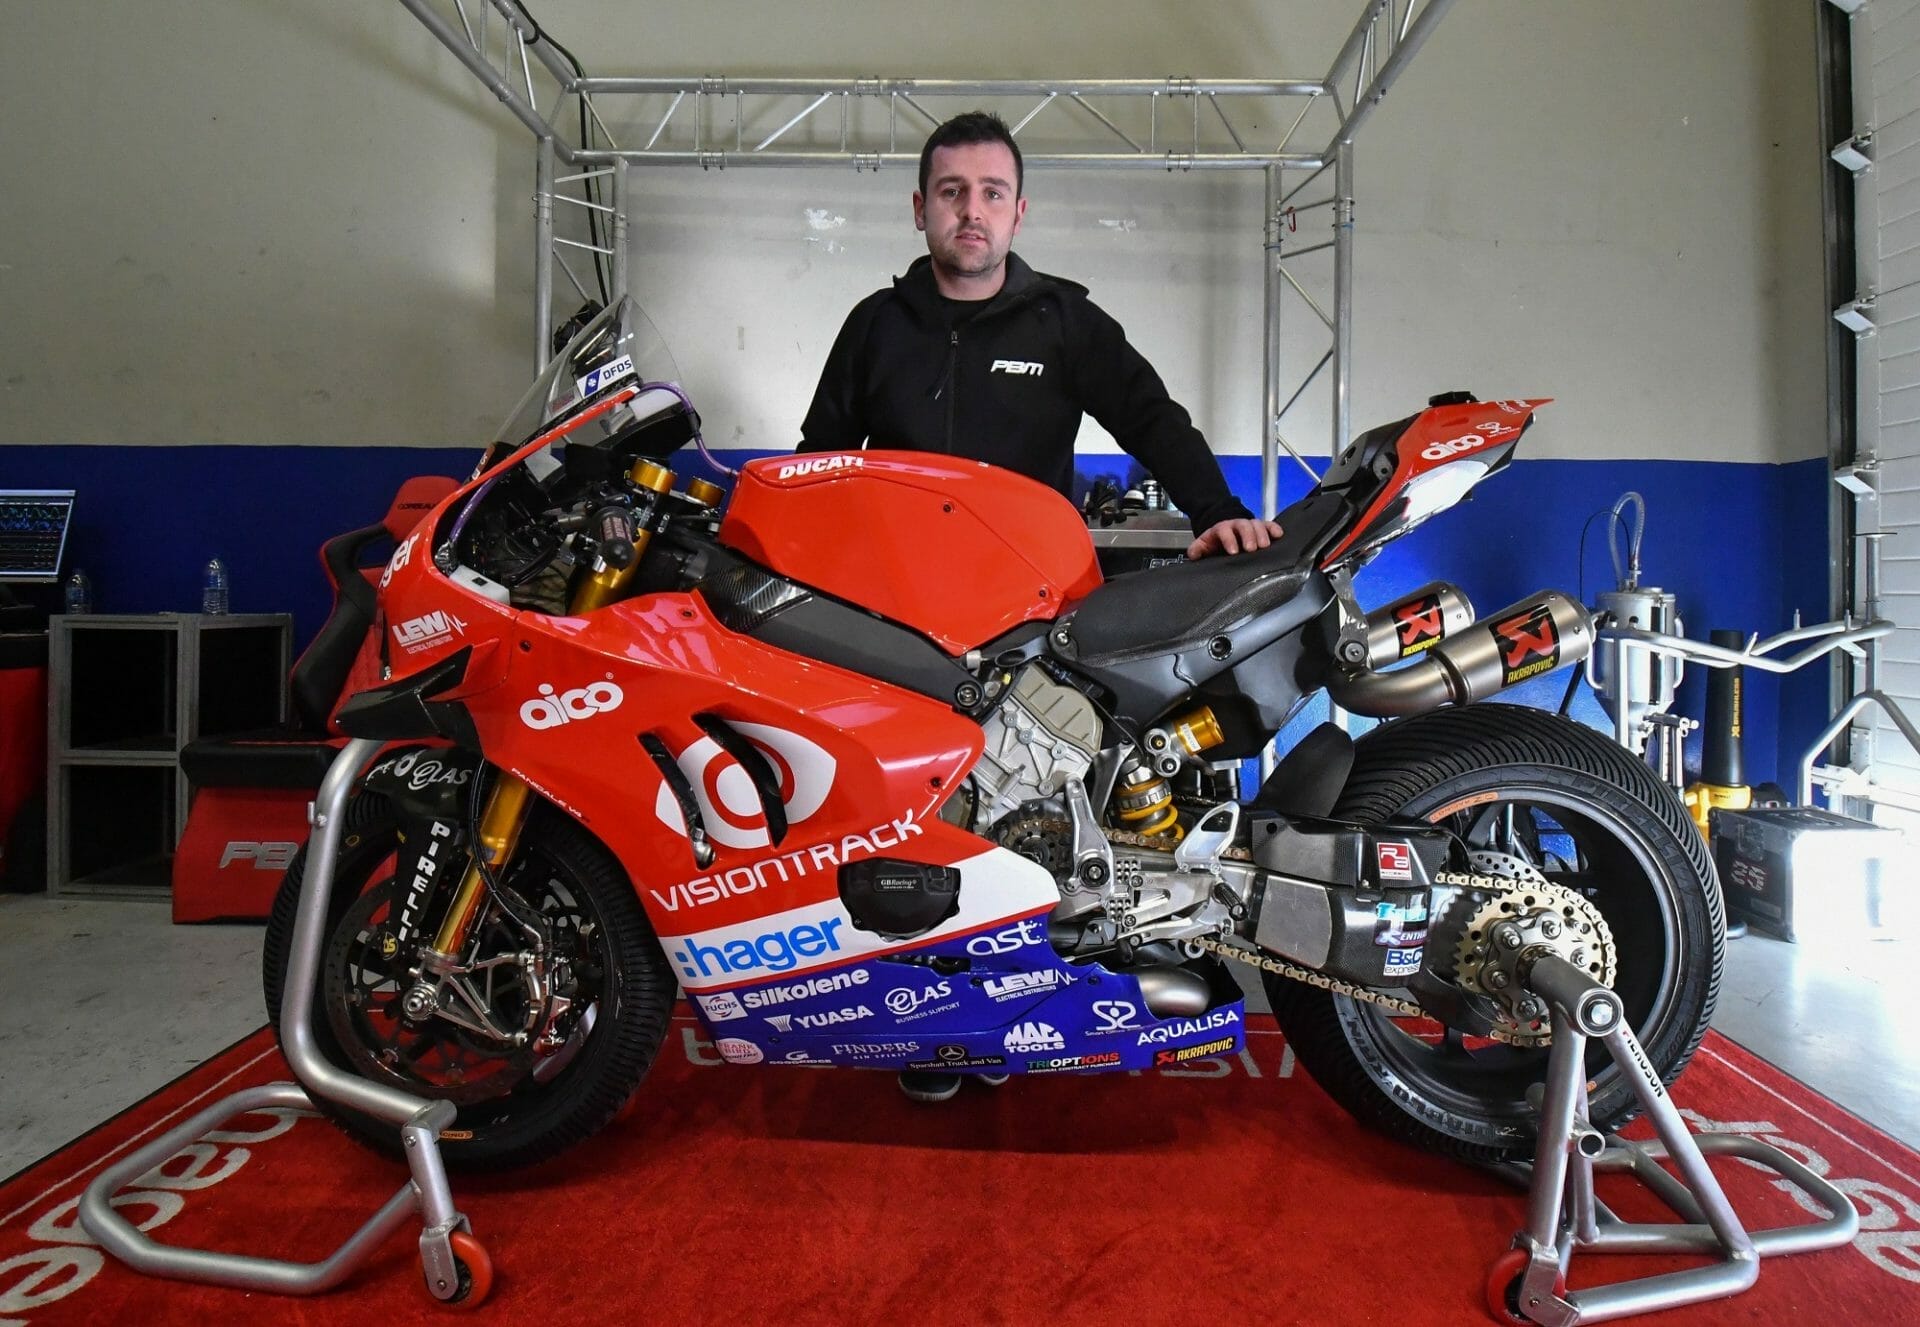 Michael Dunlop has found a team for the Isle of Man TT
- also in the MOTORCYCLE NEWS APP